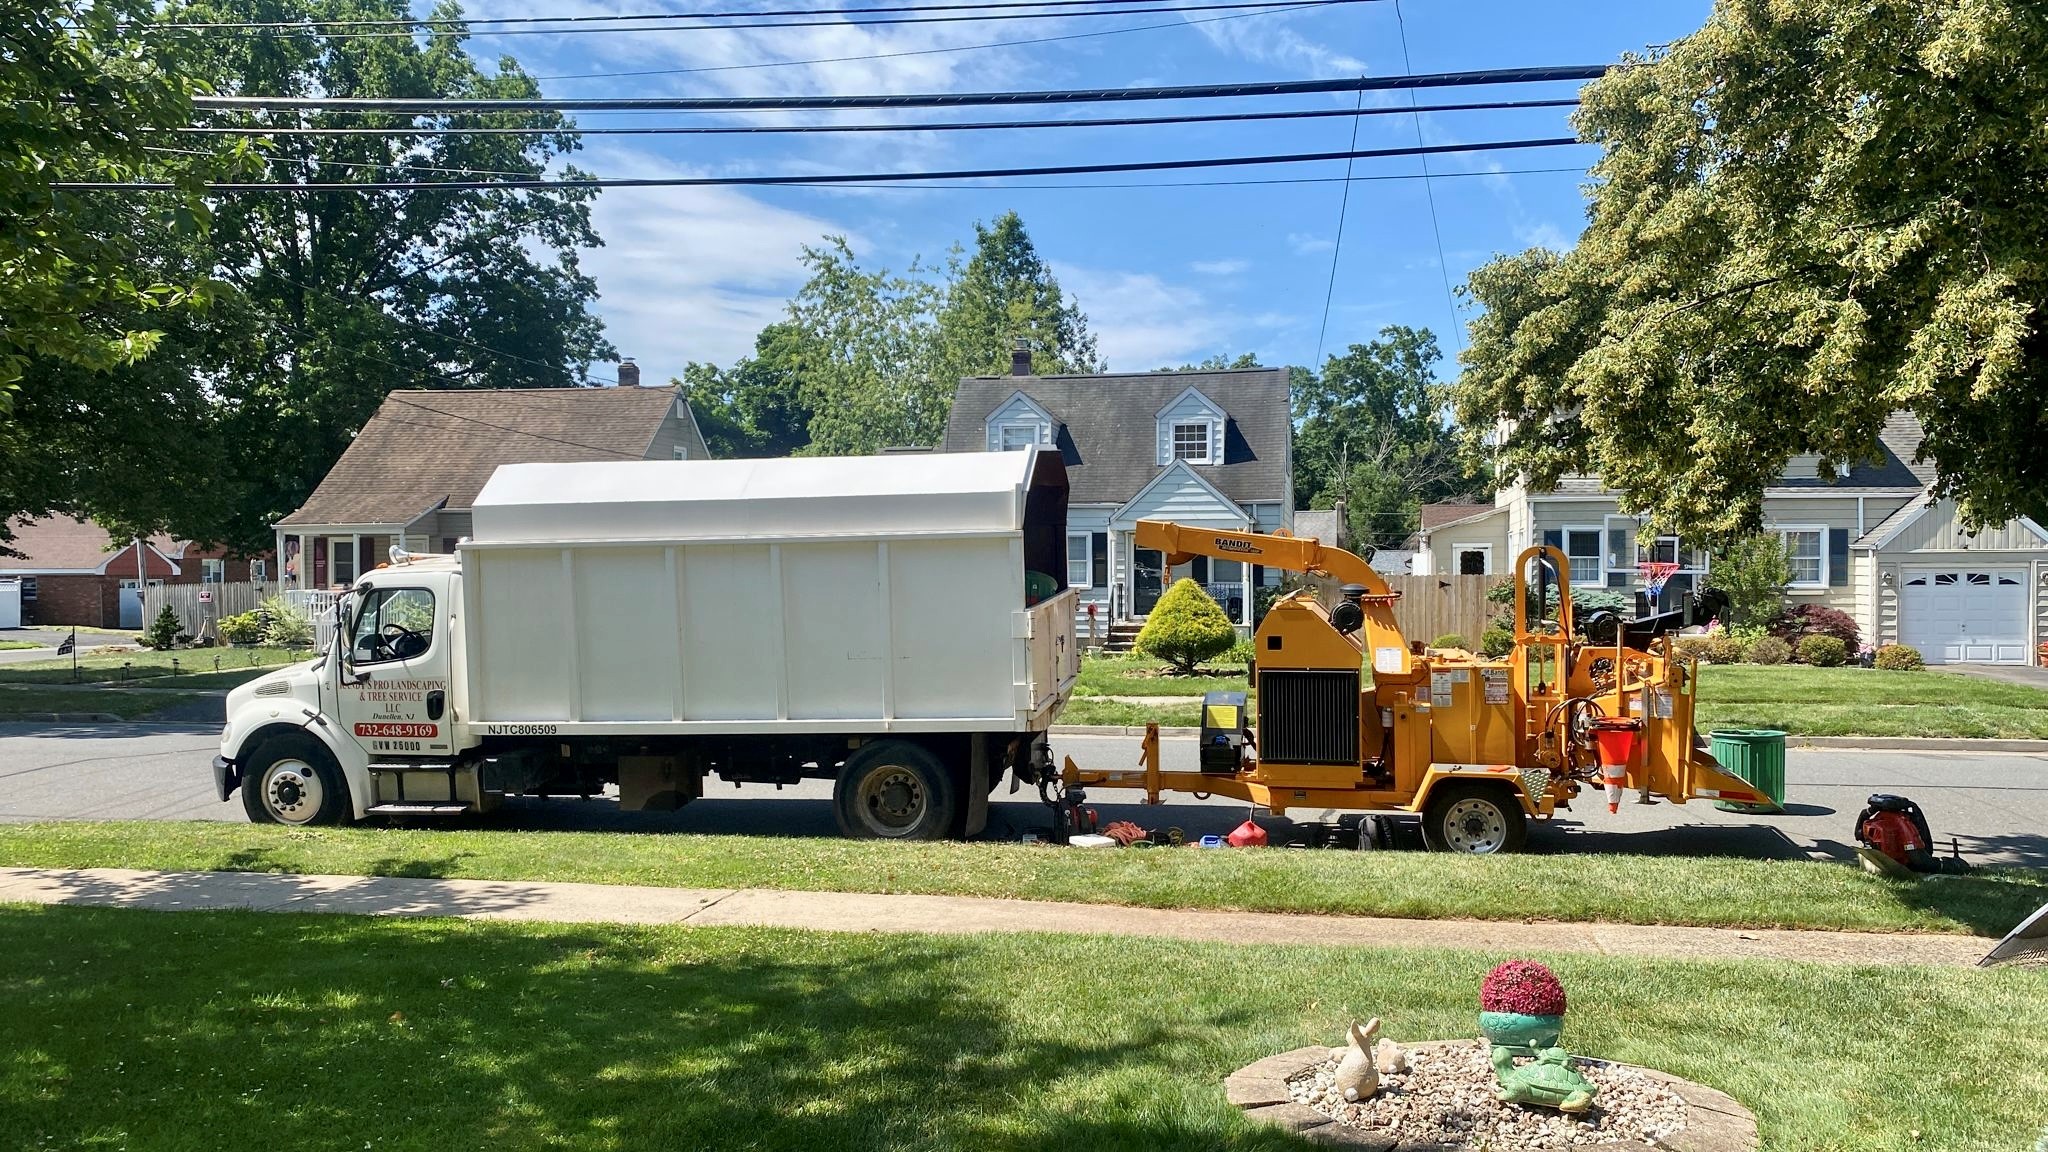 Tree Service in Middlesex,NJ on Fairview Ave